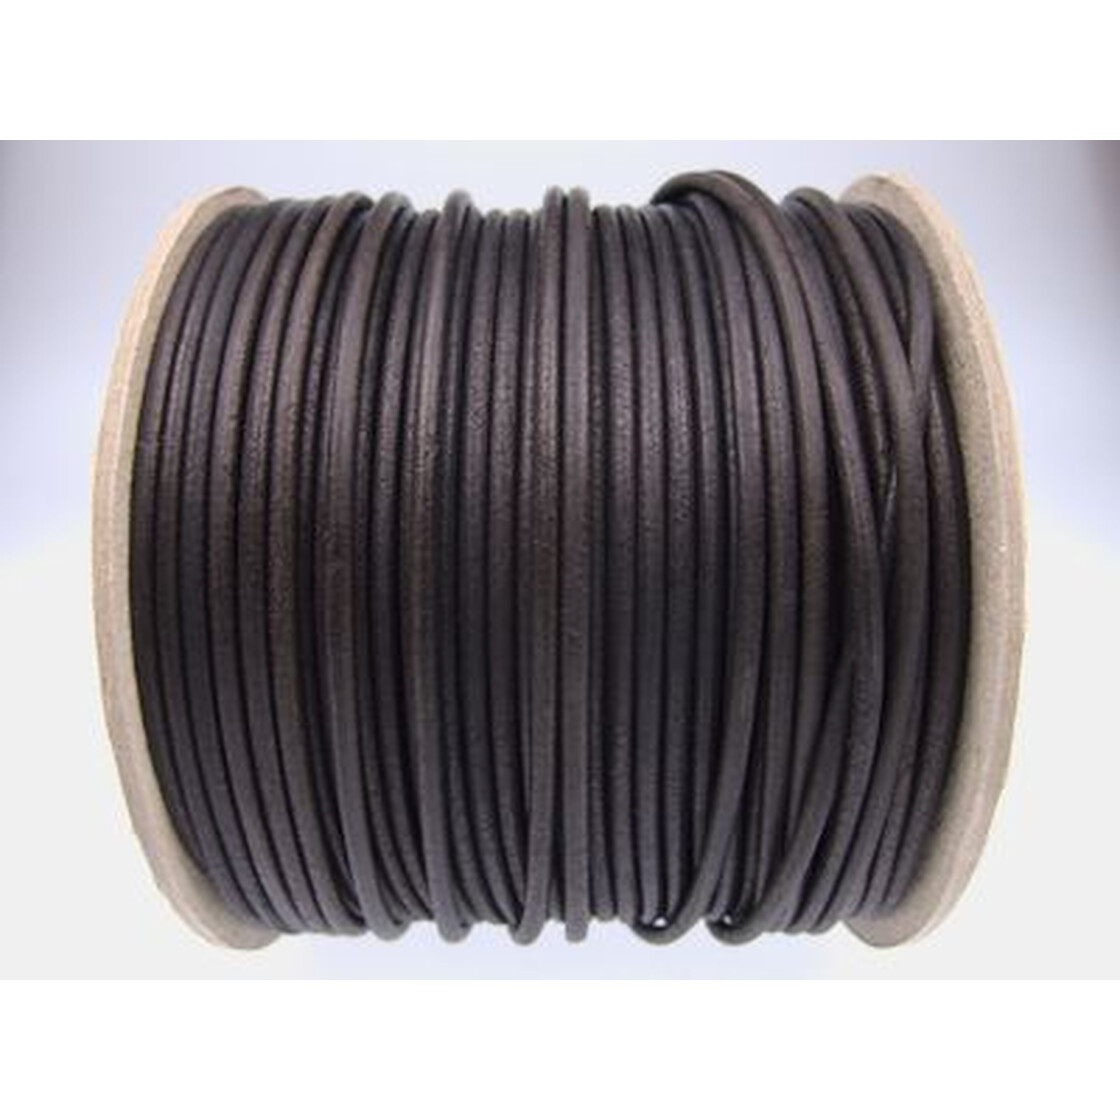 Trimming Shop 4mm Wide Bungee Rope Shock Cord, Stretchy Strap